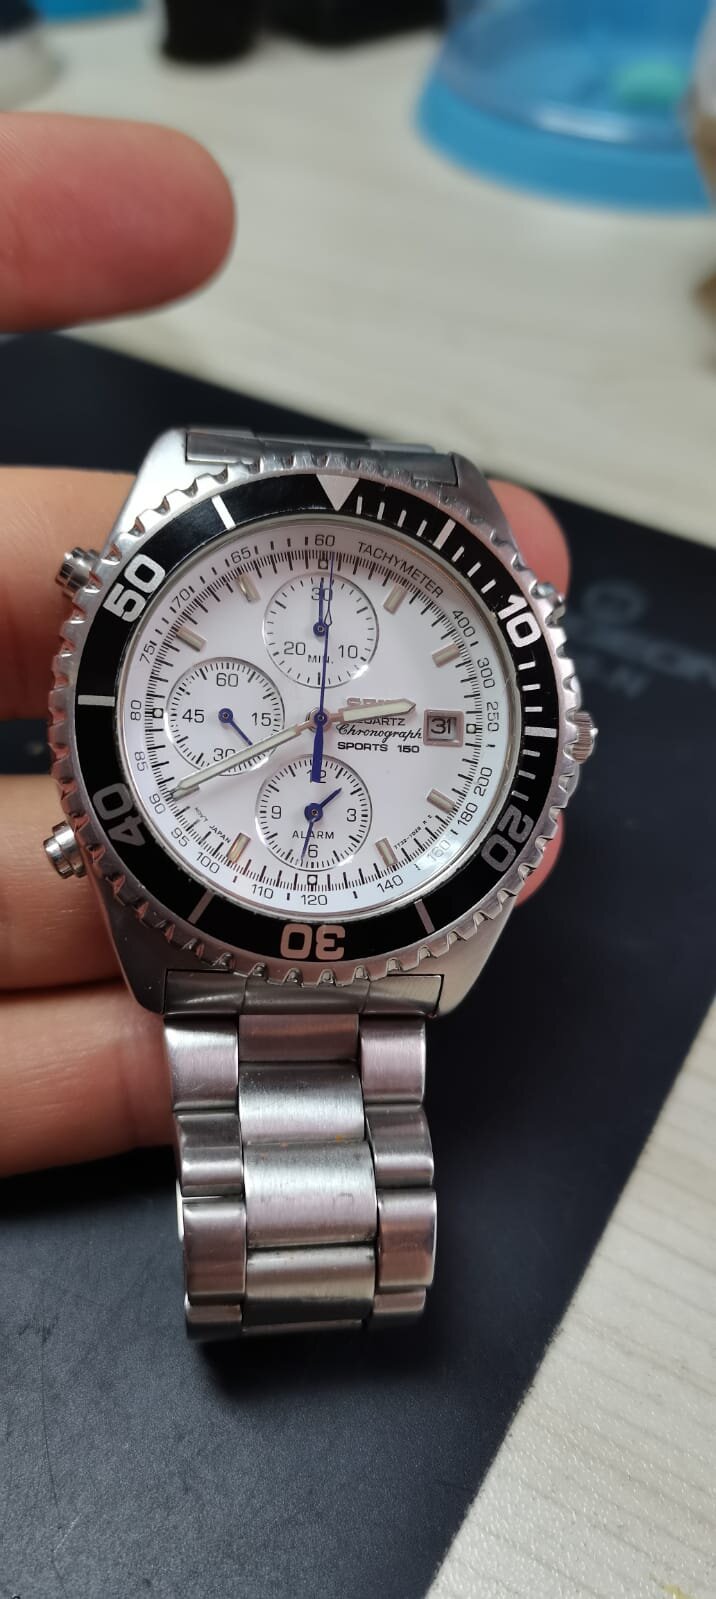 SEIKO watch repair 7T32-7C20 672566 in for battery, resealing and clean  from Bathgate, Edinburgh. | Watches Fixed | Watch Repairs | Latest Watch  News | Watch Hub